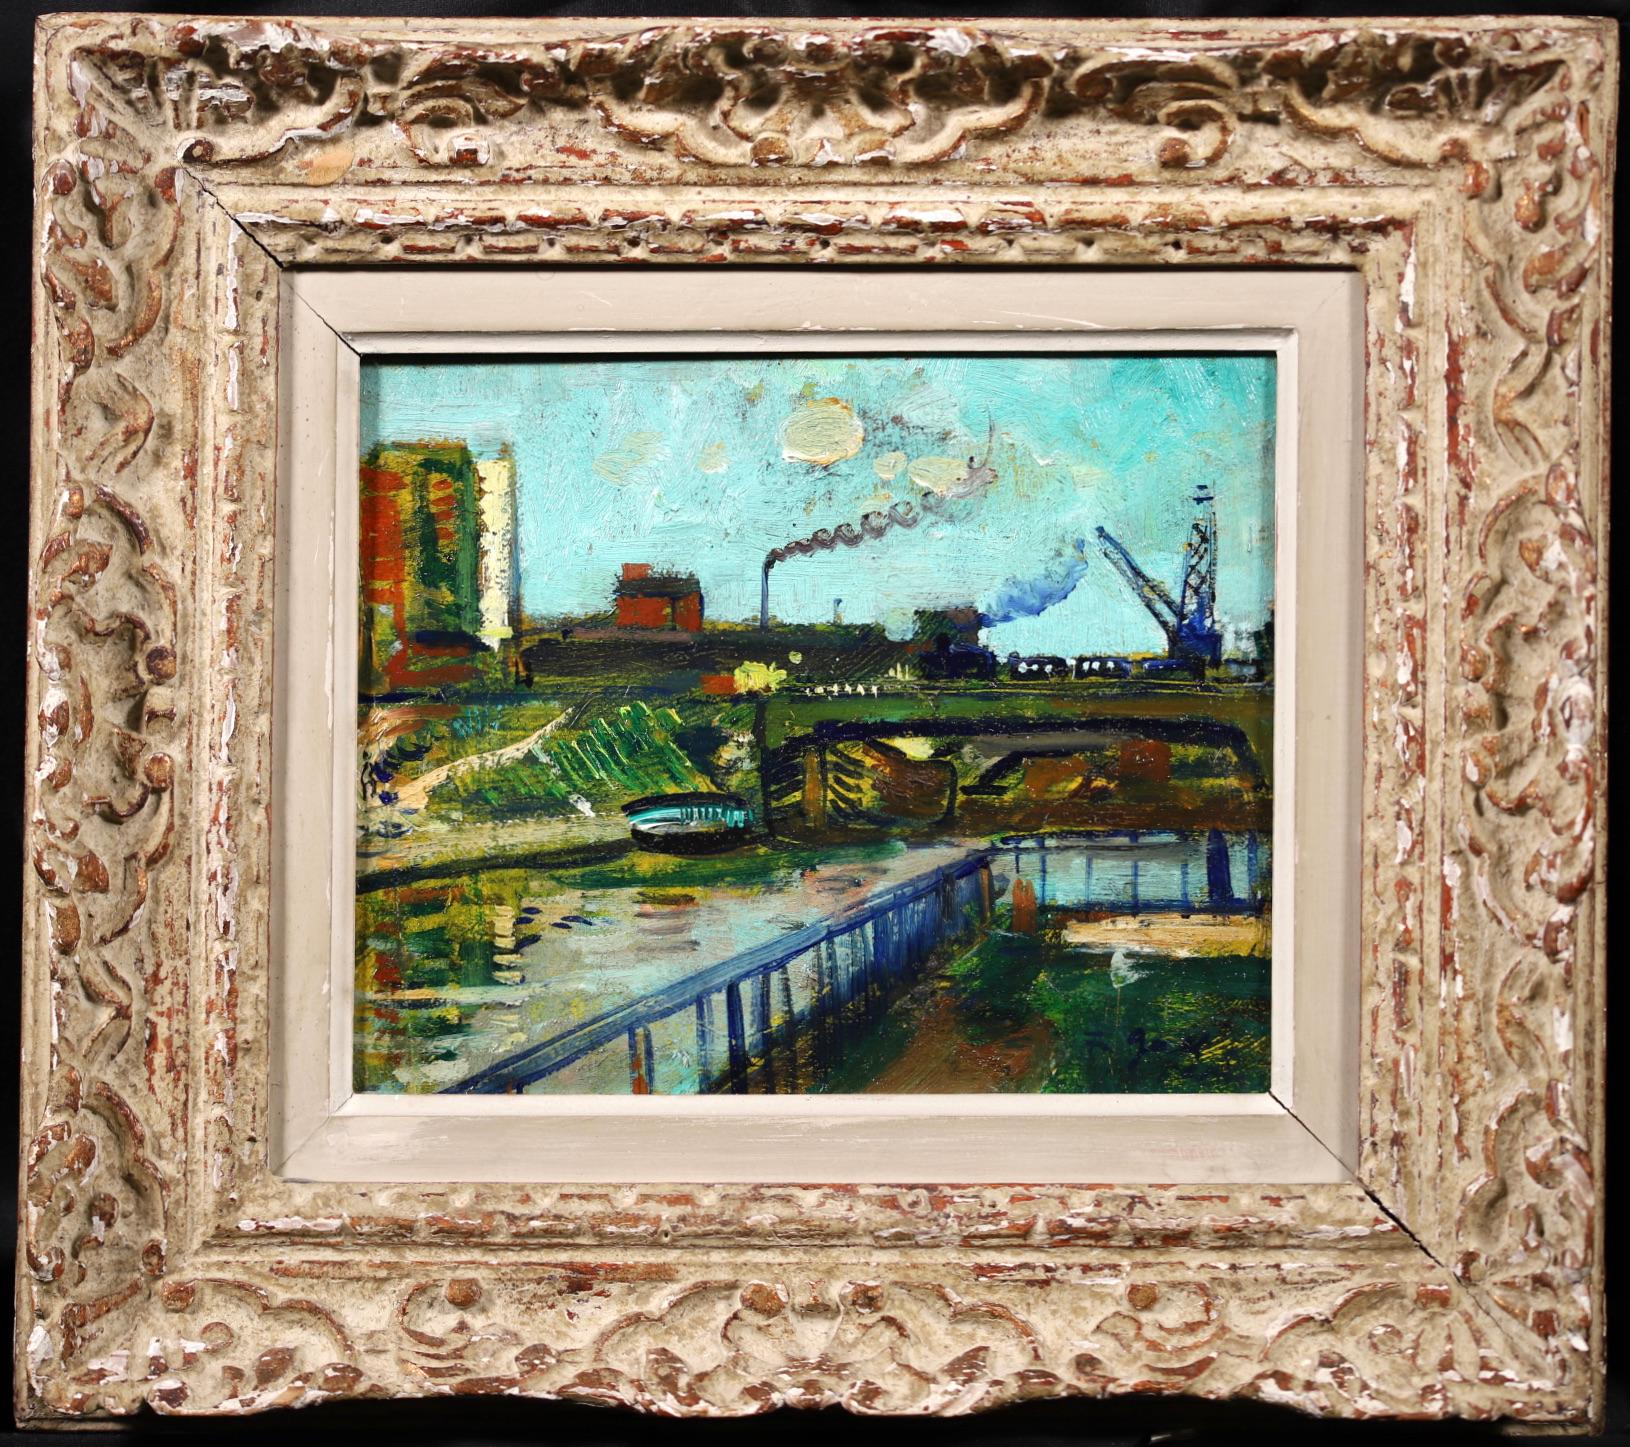 François Gall Landscape Painting - Industry on the Seine - Post Impressionist Oil, River Landscape by Francois Gall